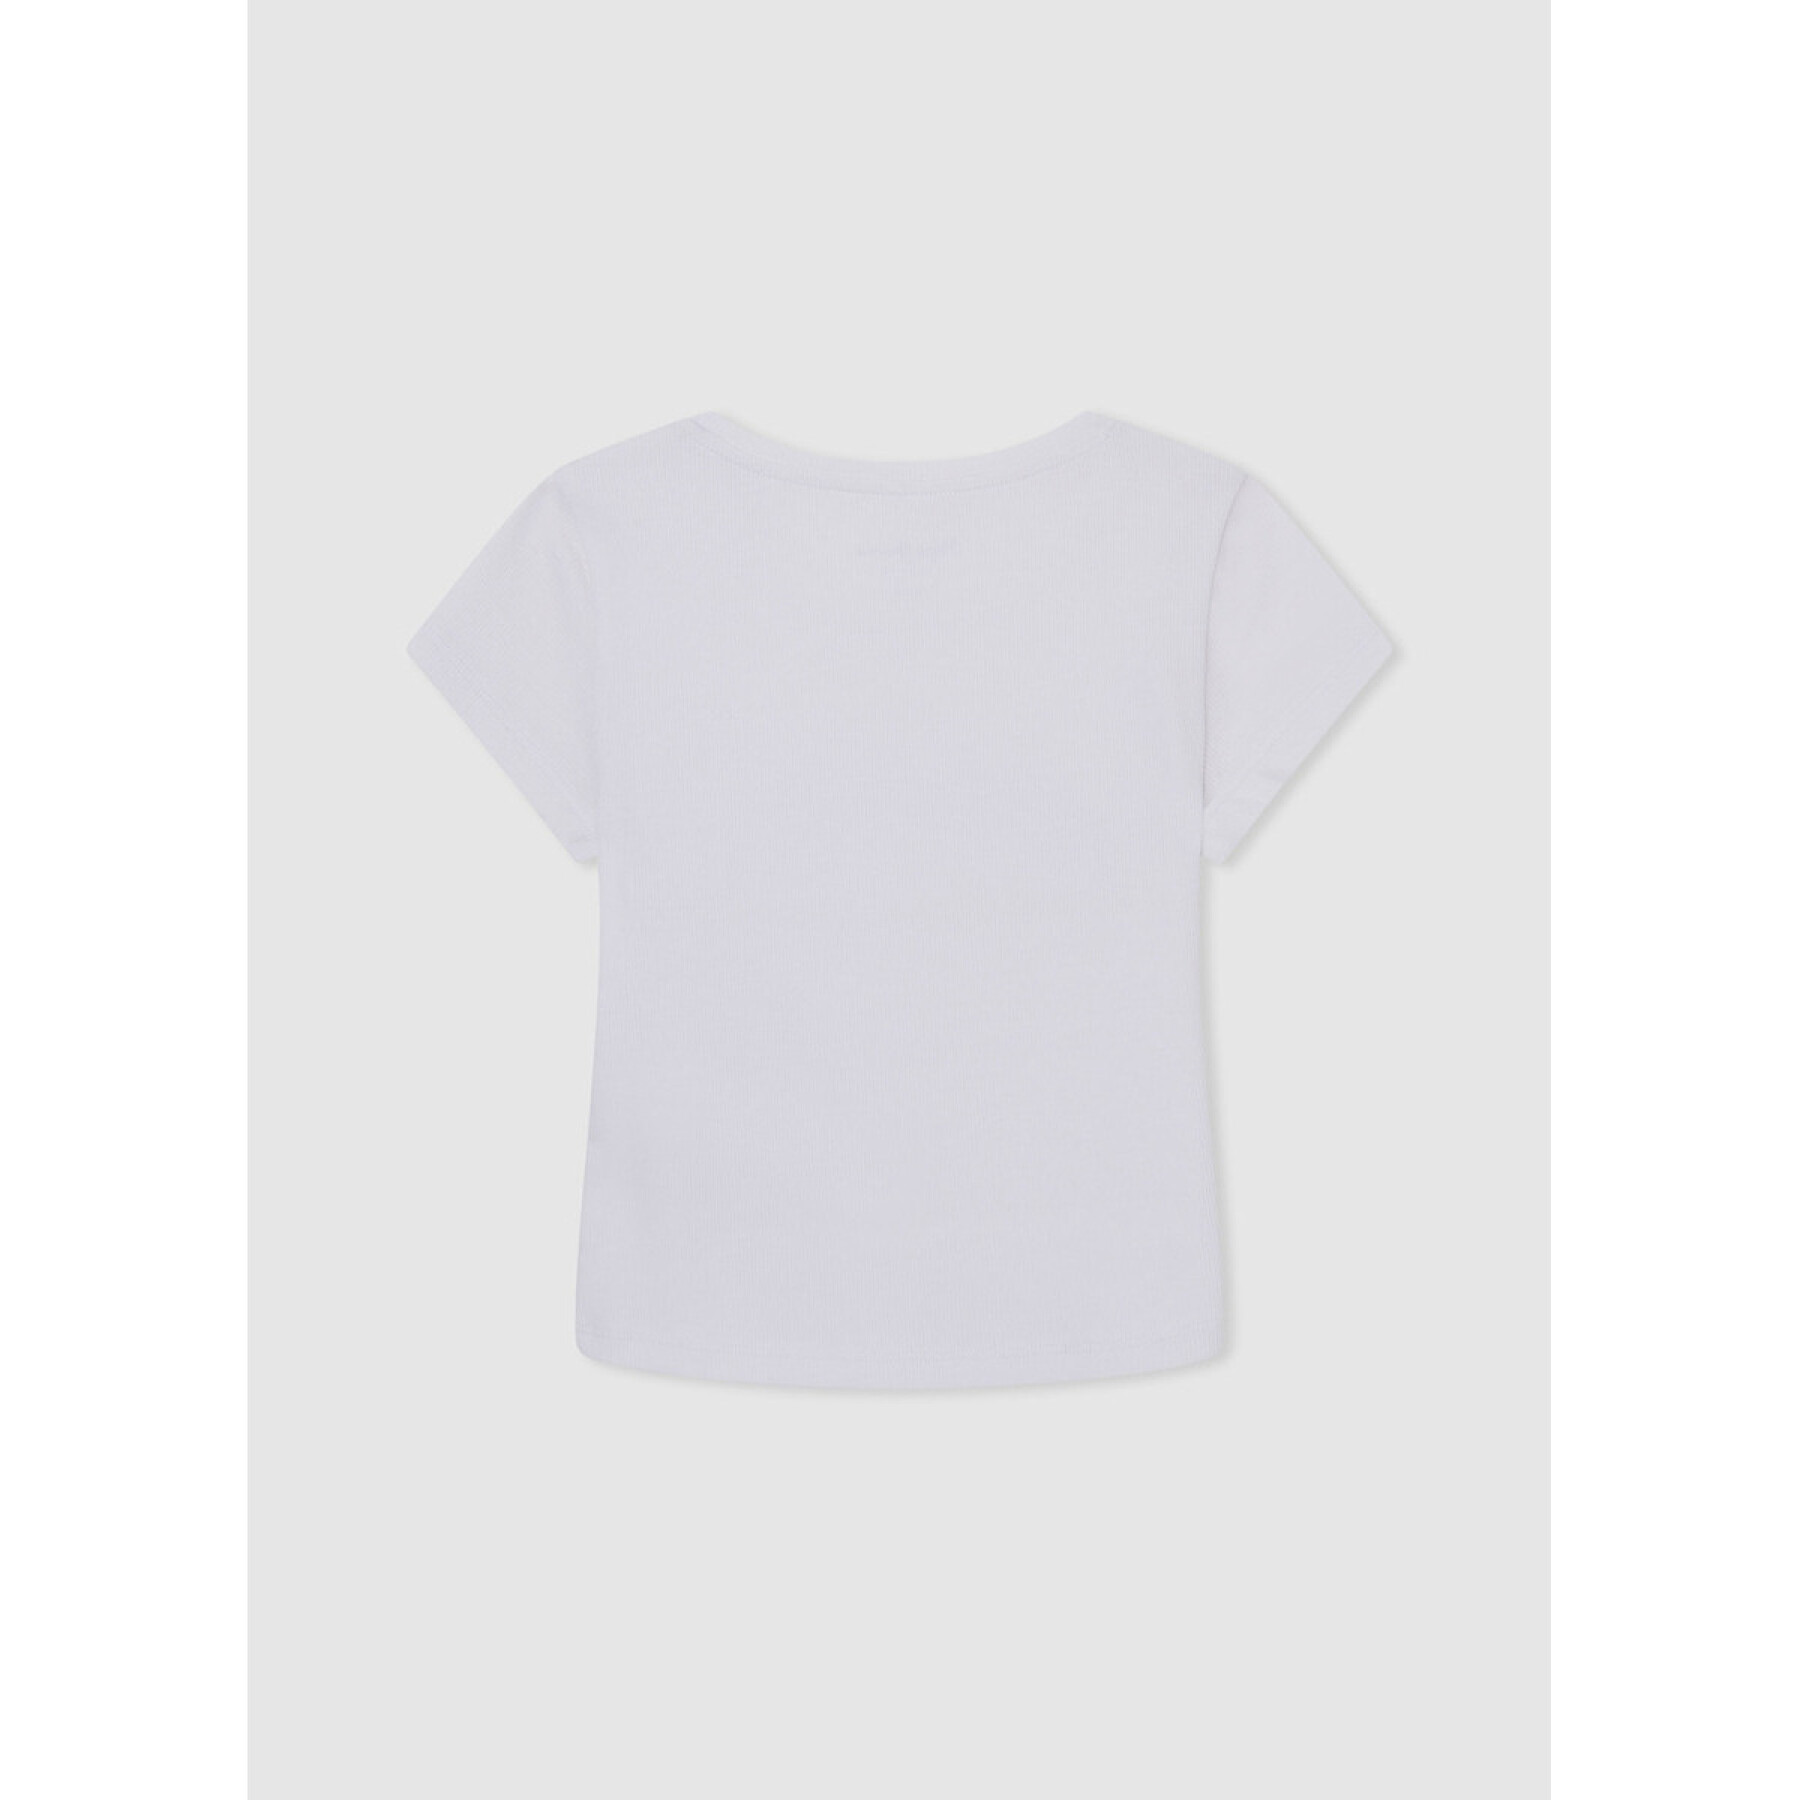 T-shirt fille Pepe Jeans Nicolle